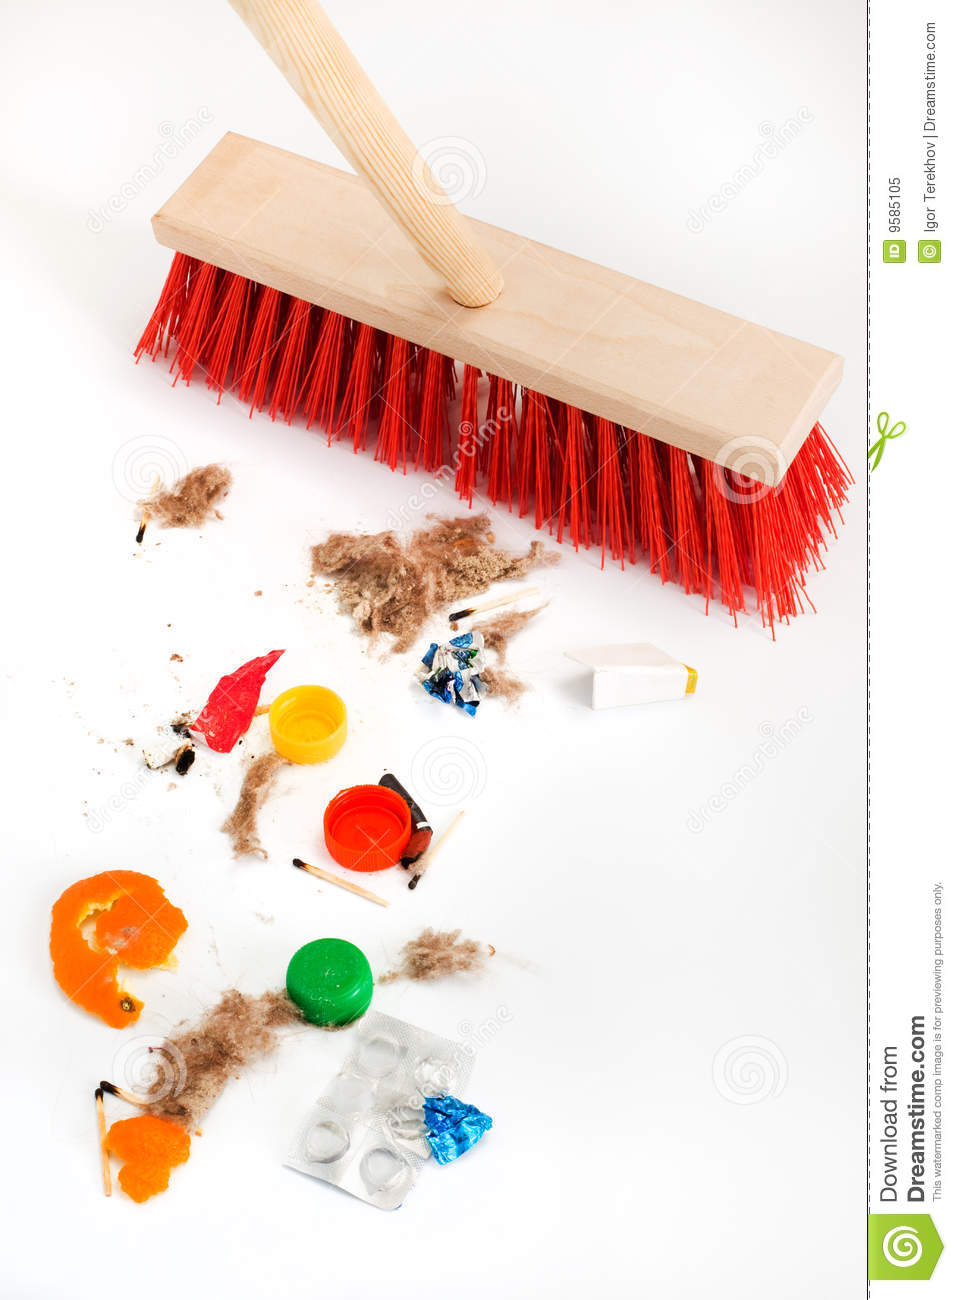 Mop And Mixed Debris Royalty Free Stock Photo   Image  9585105